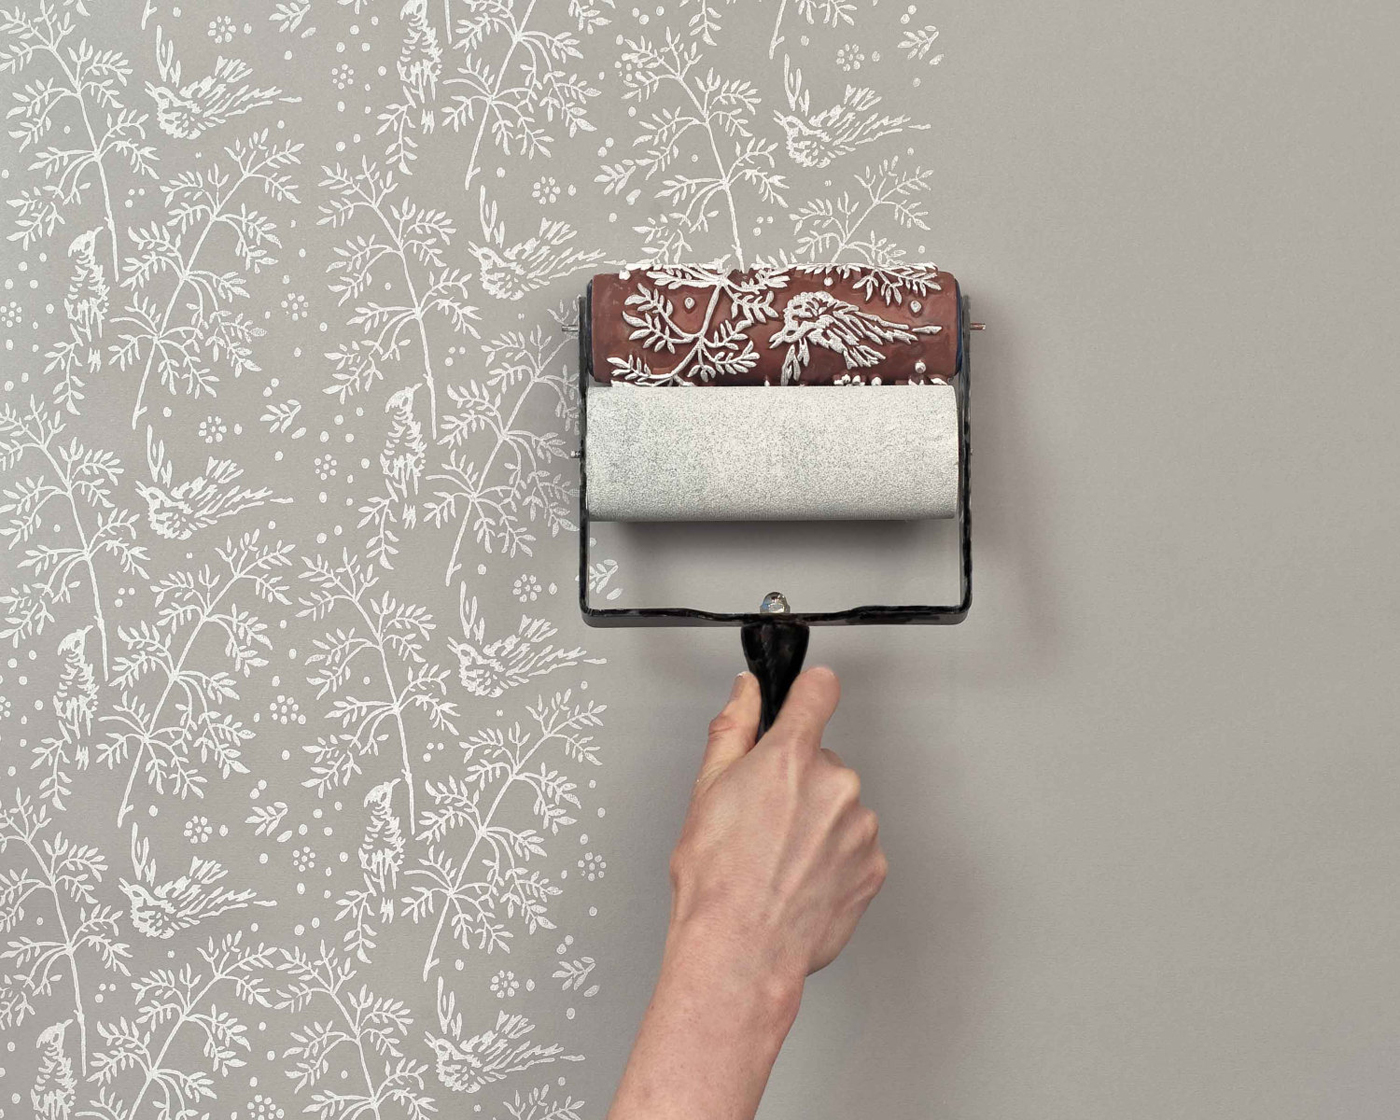 Wallpaper Paint The Paint Roller That Creates A Wallpaper Look